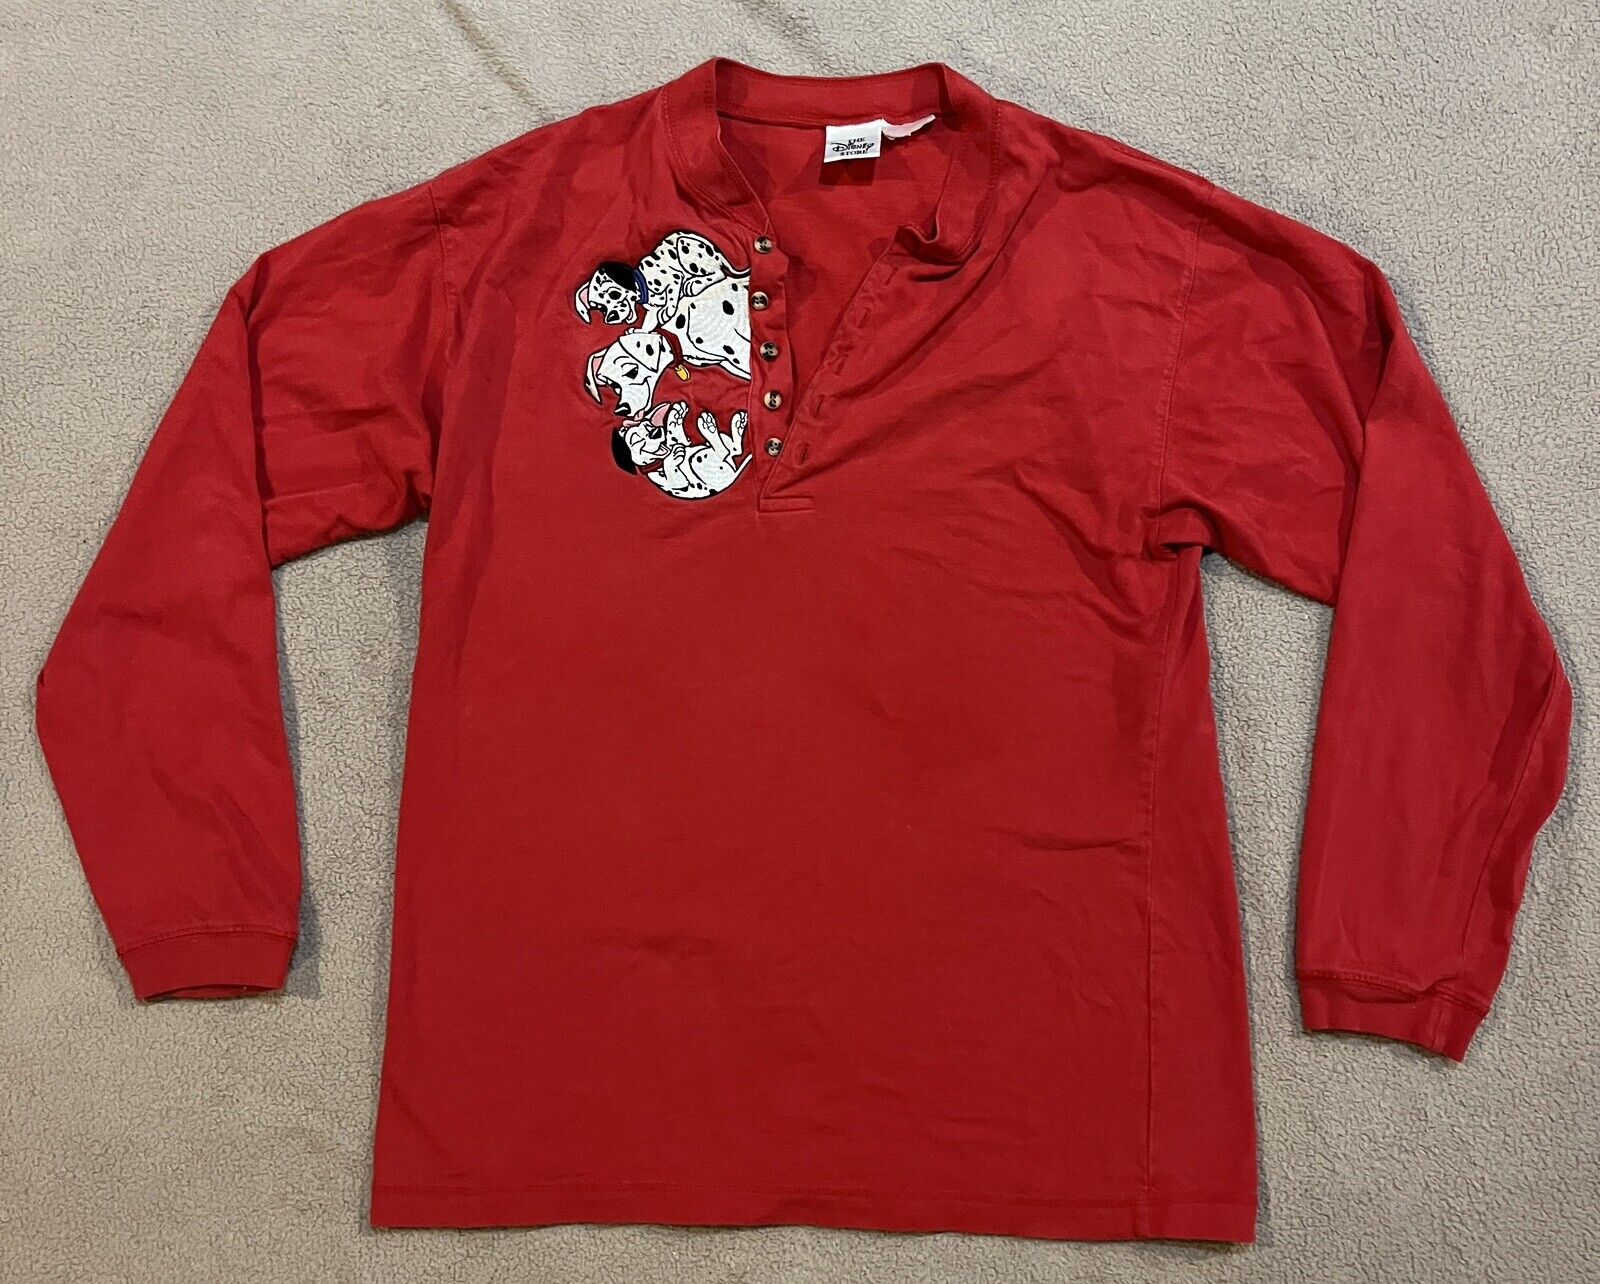 Vintage Disney Store 101 Dalmatians Adult M/L Shirt Embroidered Henley Red